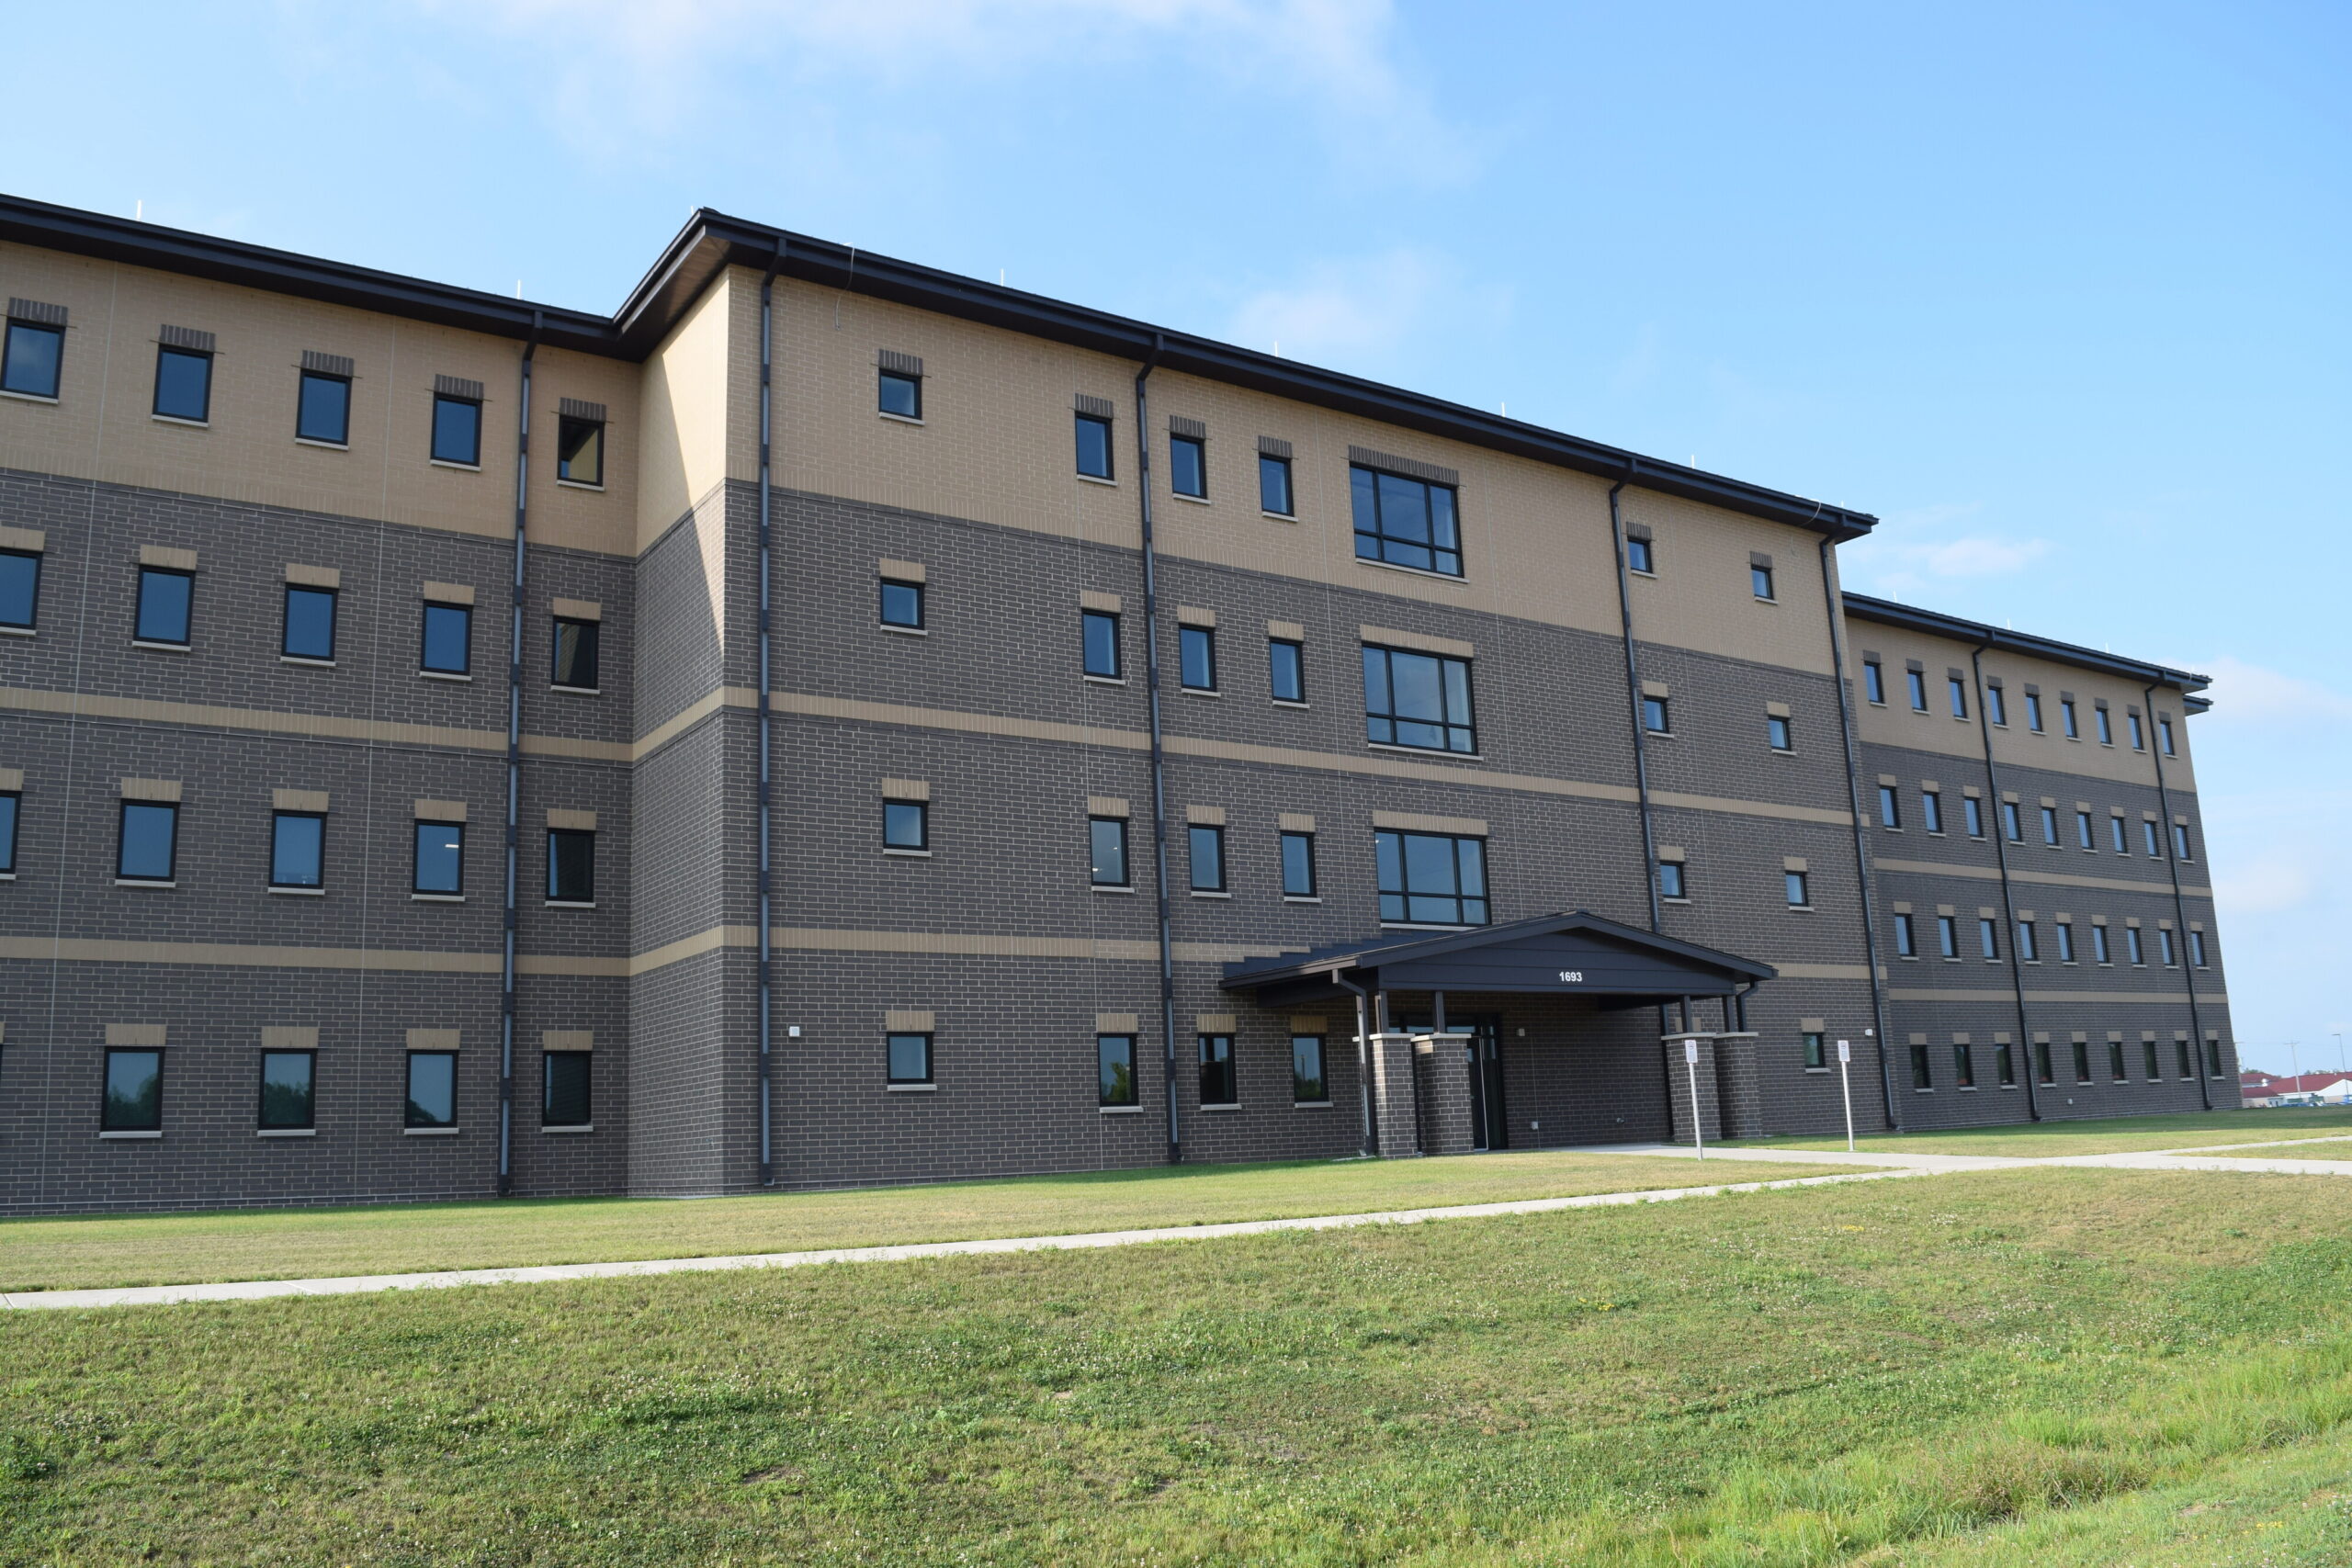 With an eye toward the future, Fort McCoy builds new housing facilities, restores WWII barracks